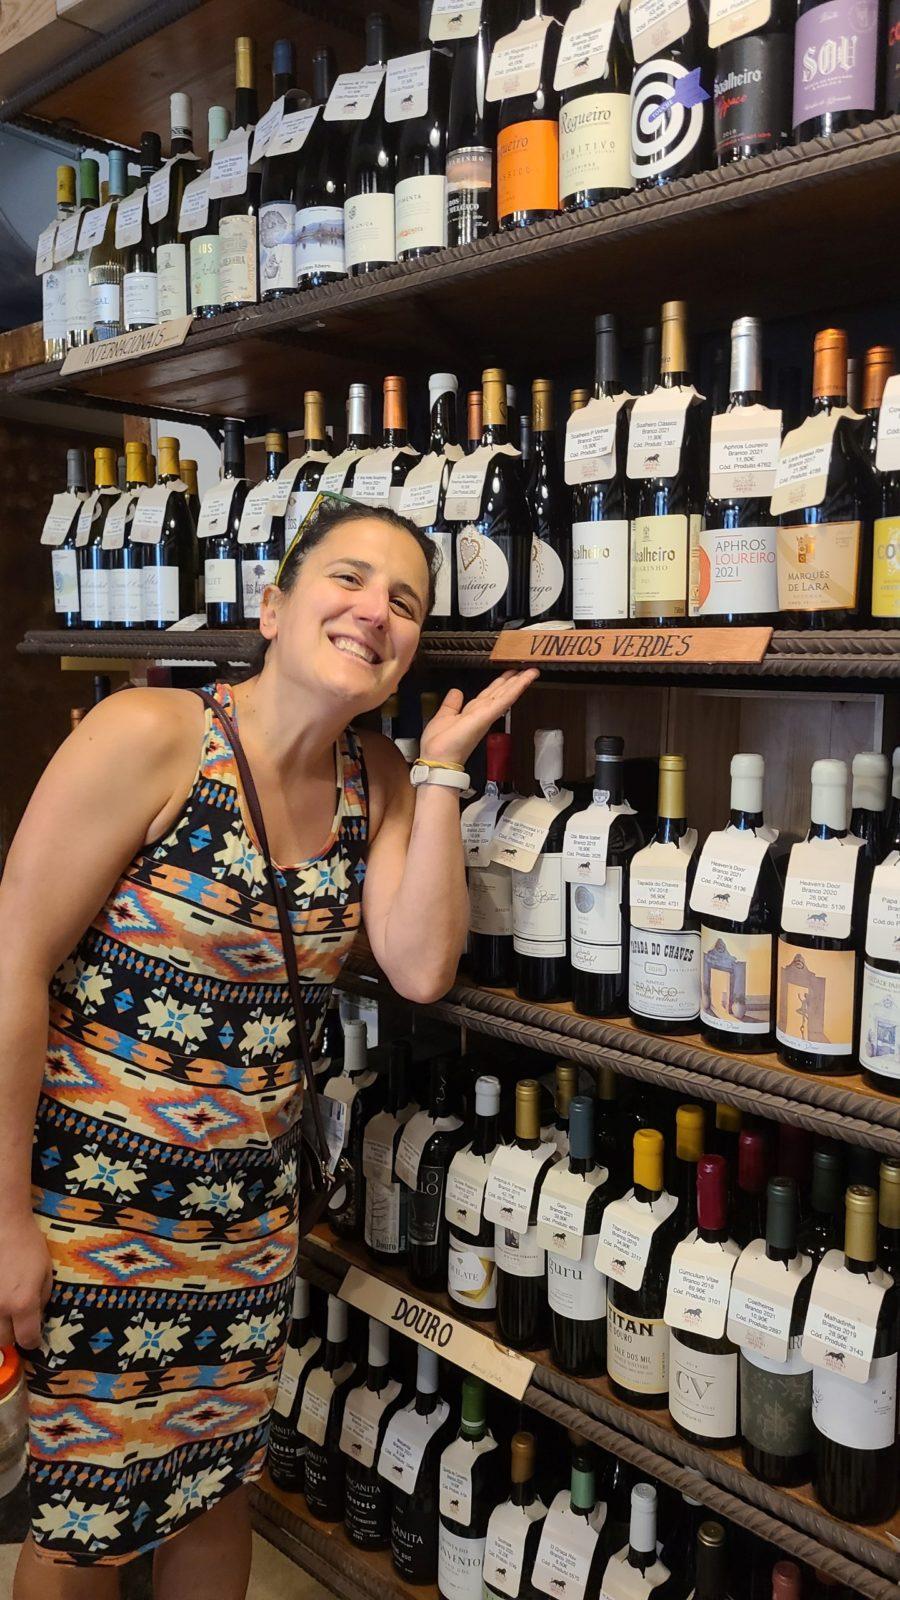 Bridget standing next to a wall of wine bottles in Portugal.